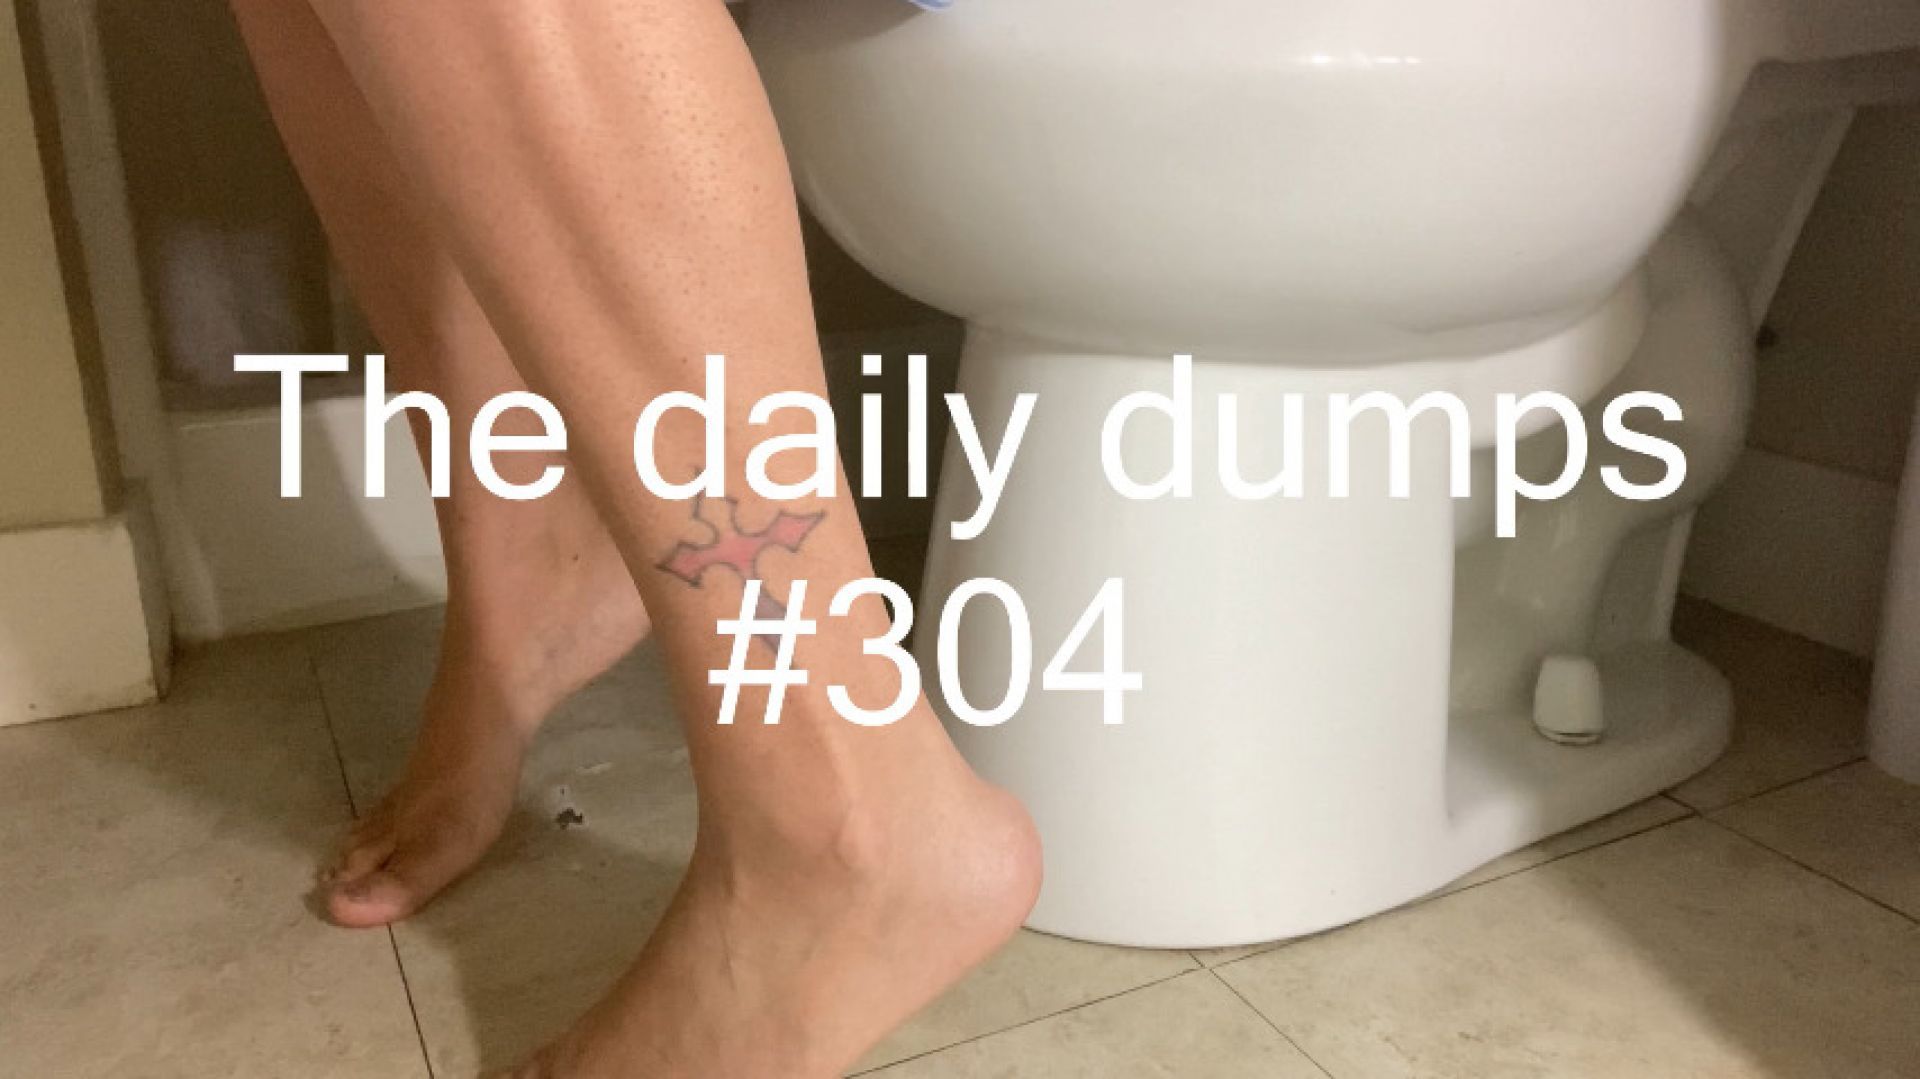 The daily dumps #304